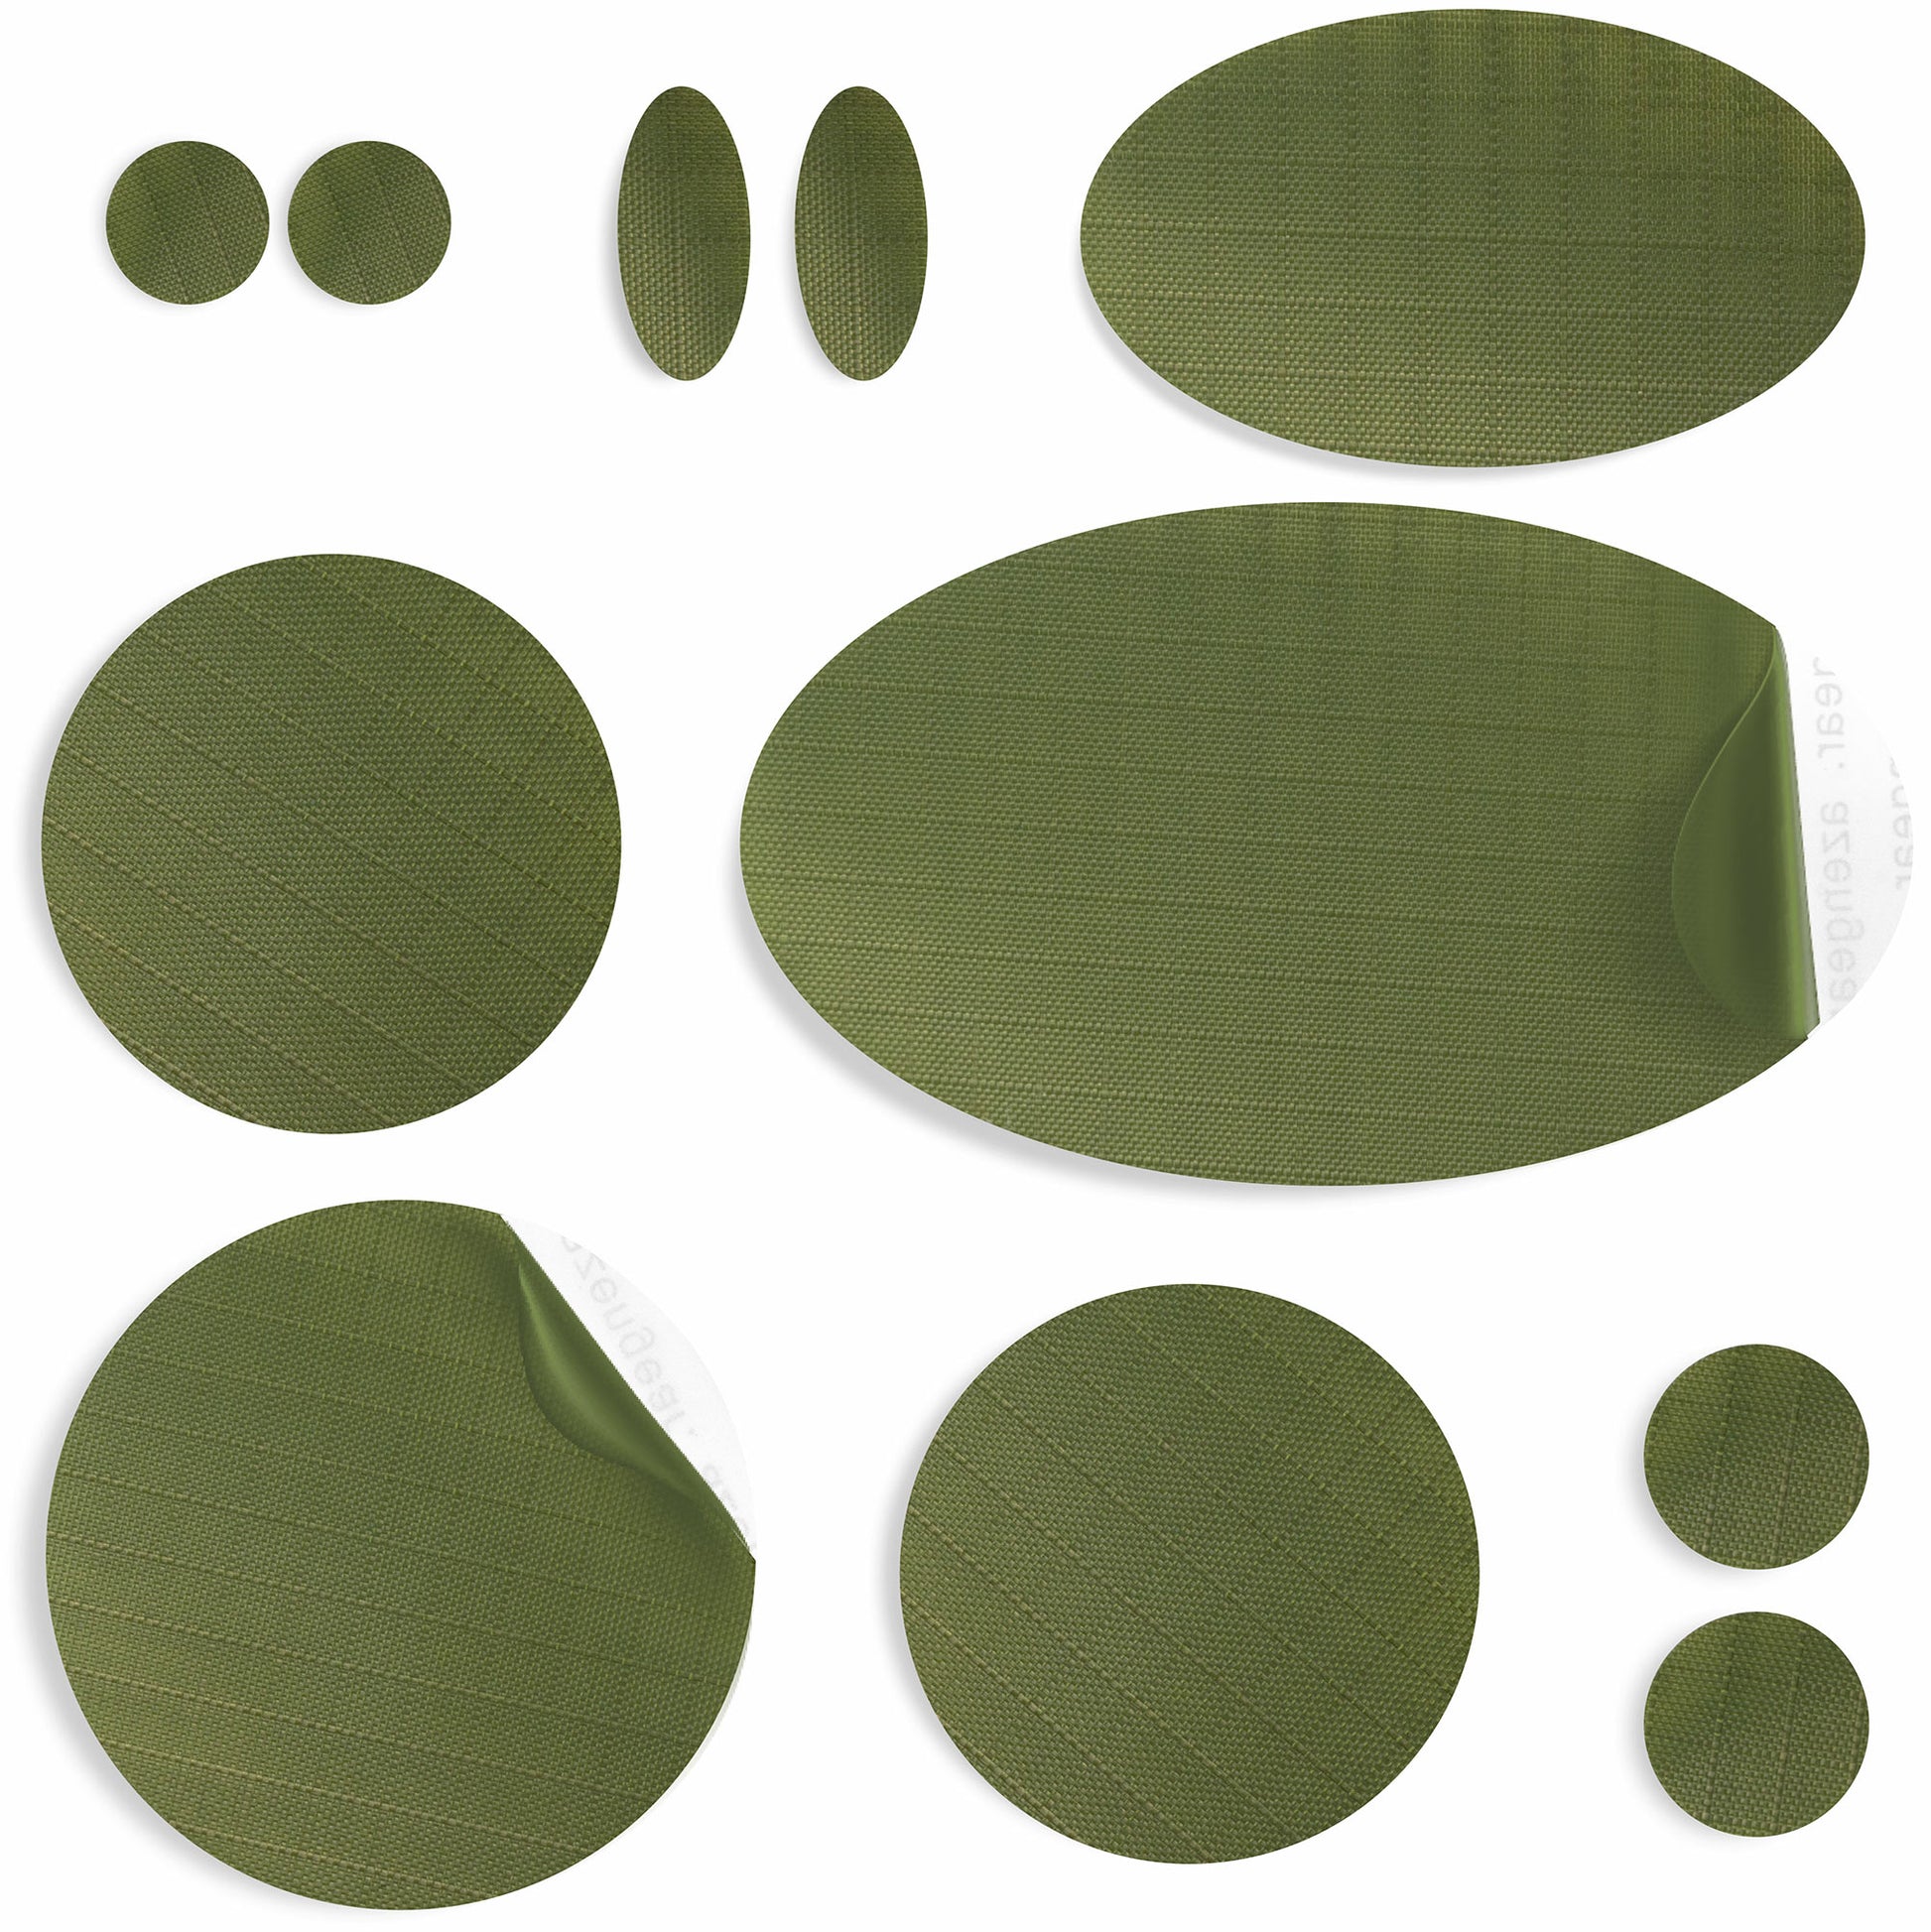 Olive Green Puffer Jacket Repair Patches | Waterproof, Pre-Cut, Self-Adhesive, Tear-Resistant (11 Pieces)